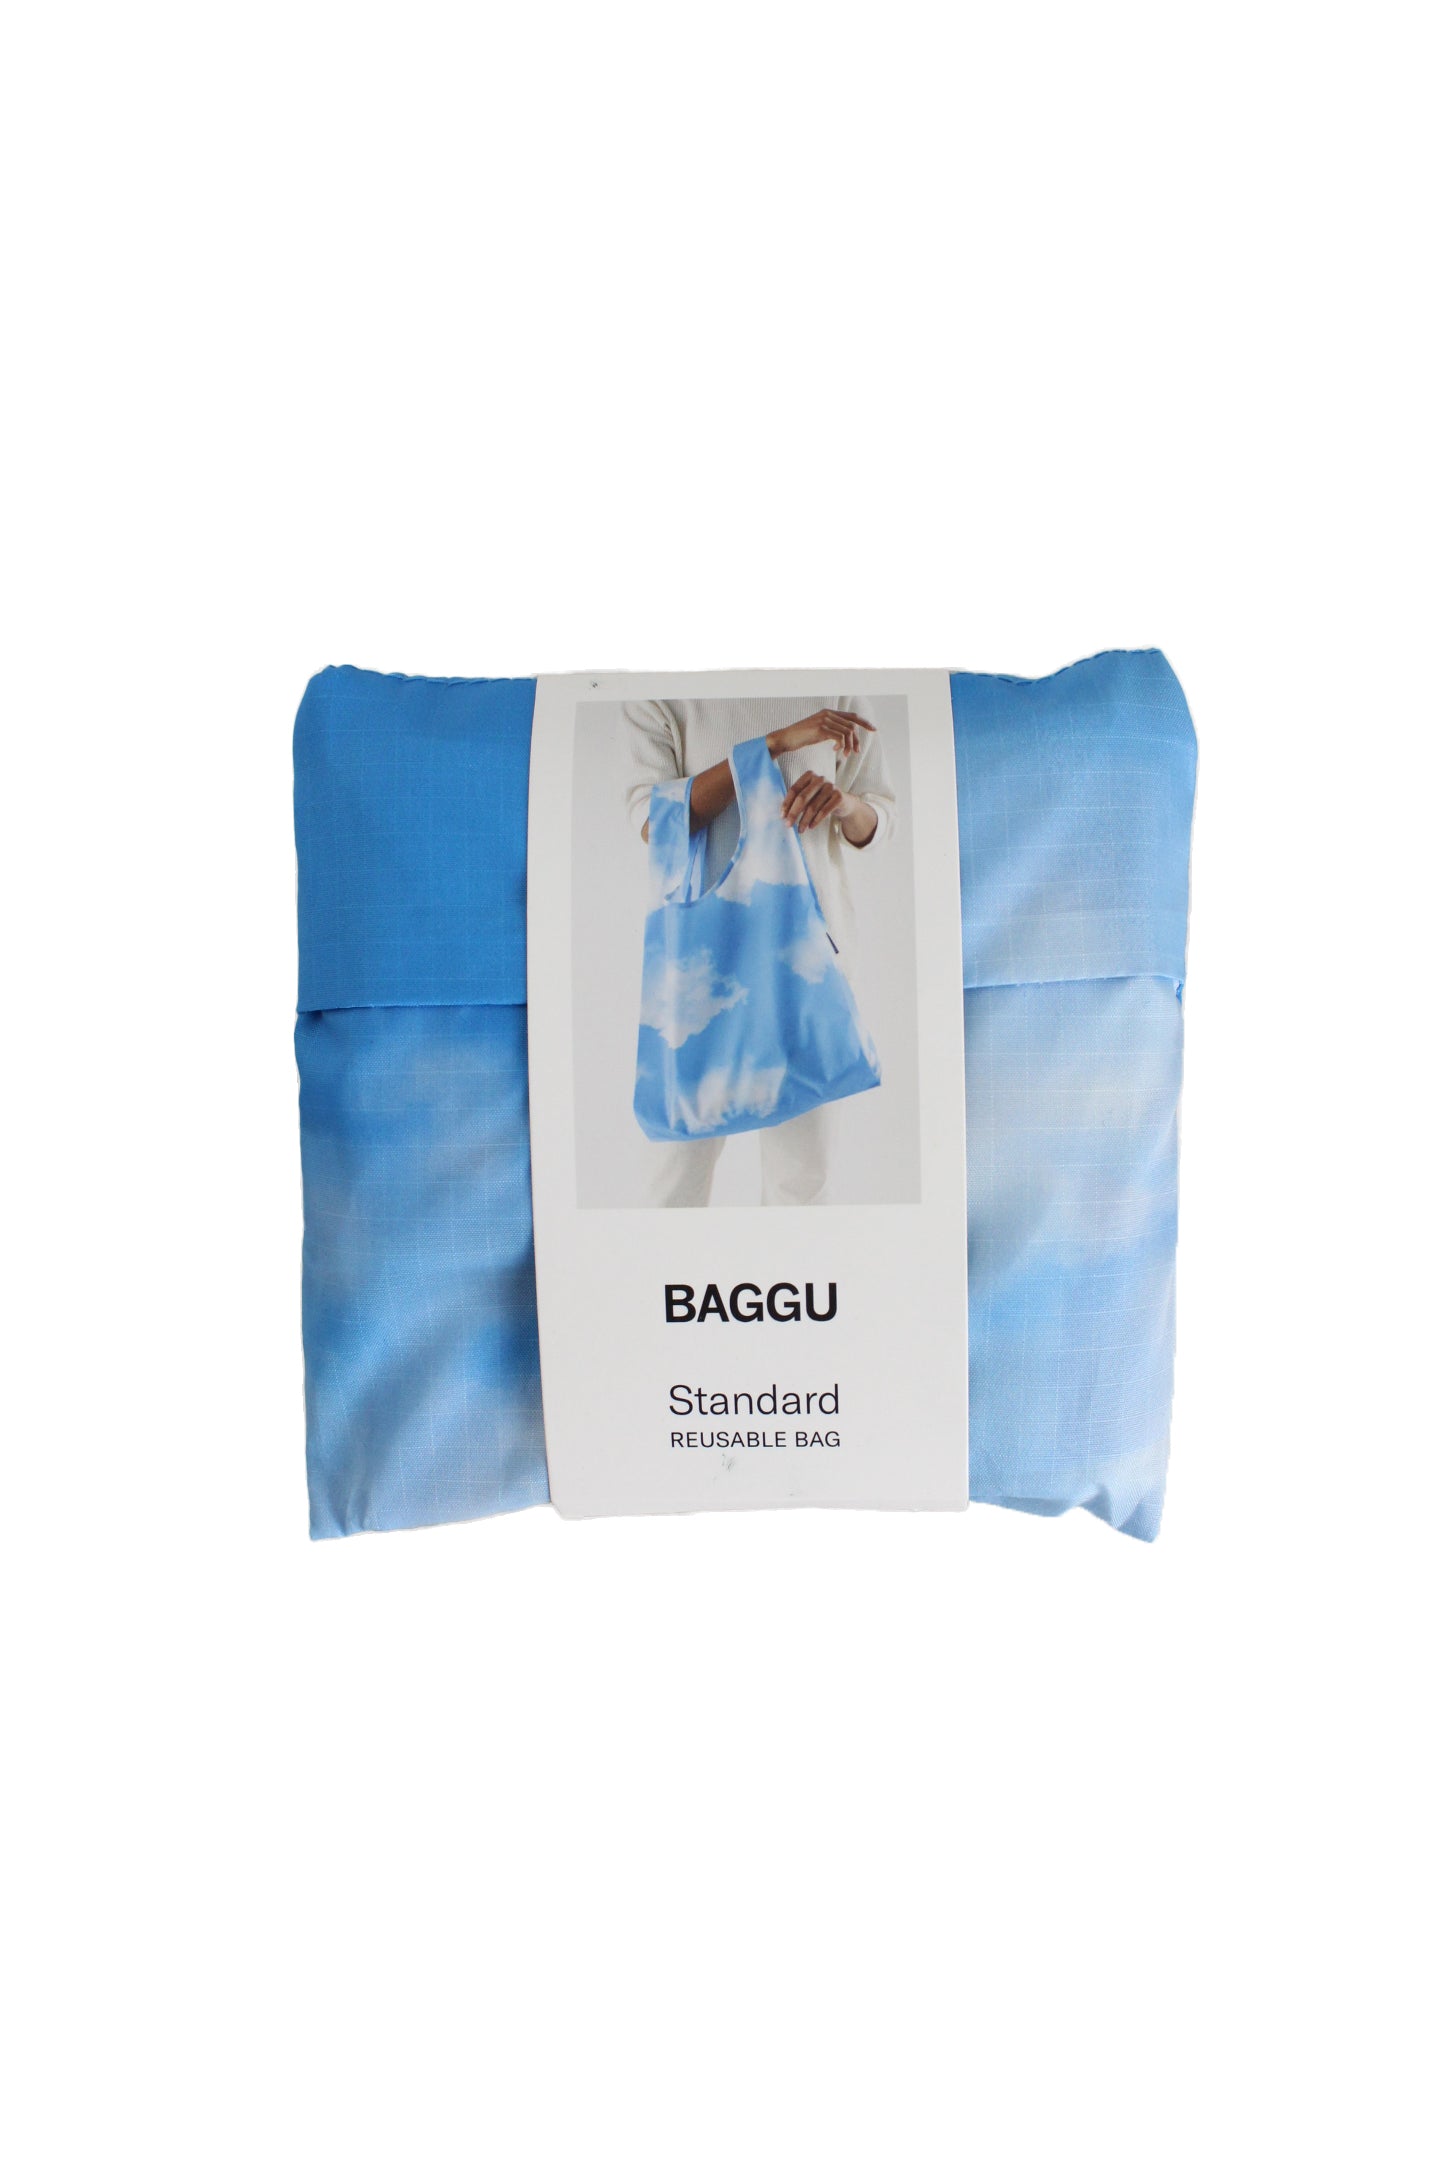 baggu blue reusable bag. features clouds print throughout, two straps, and embroidered logo tag.